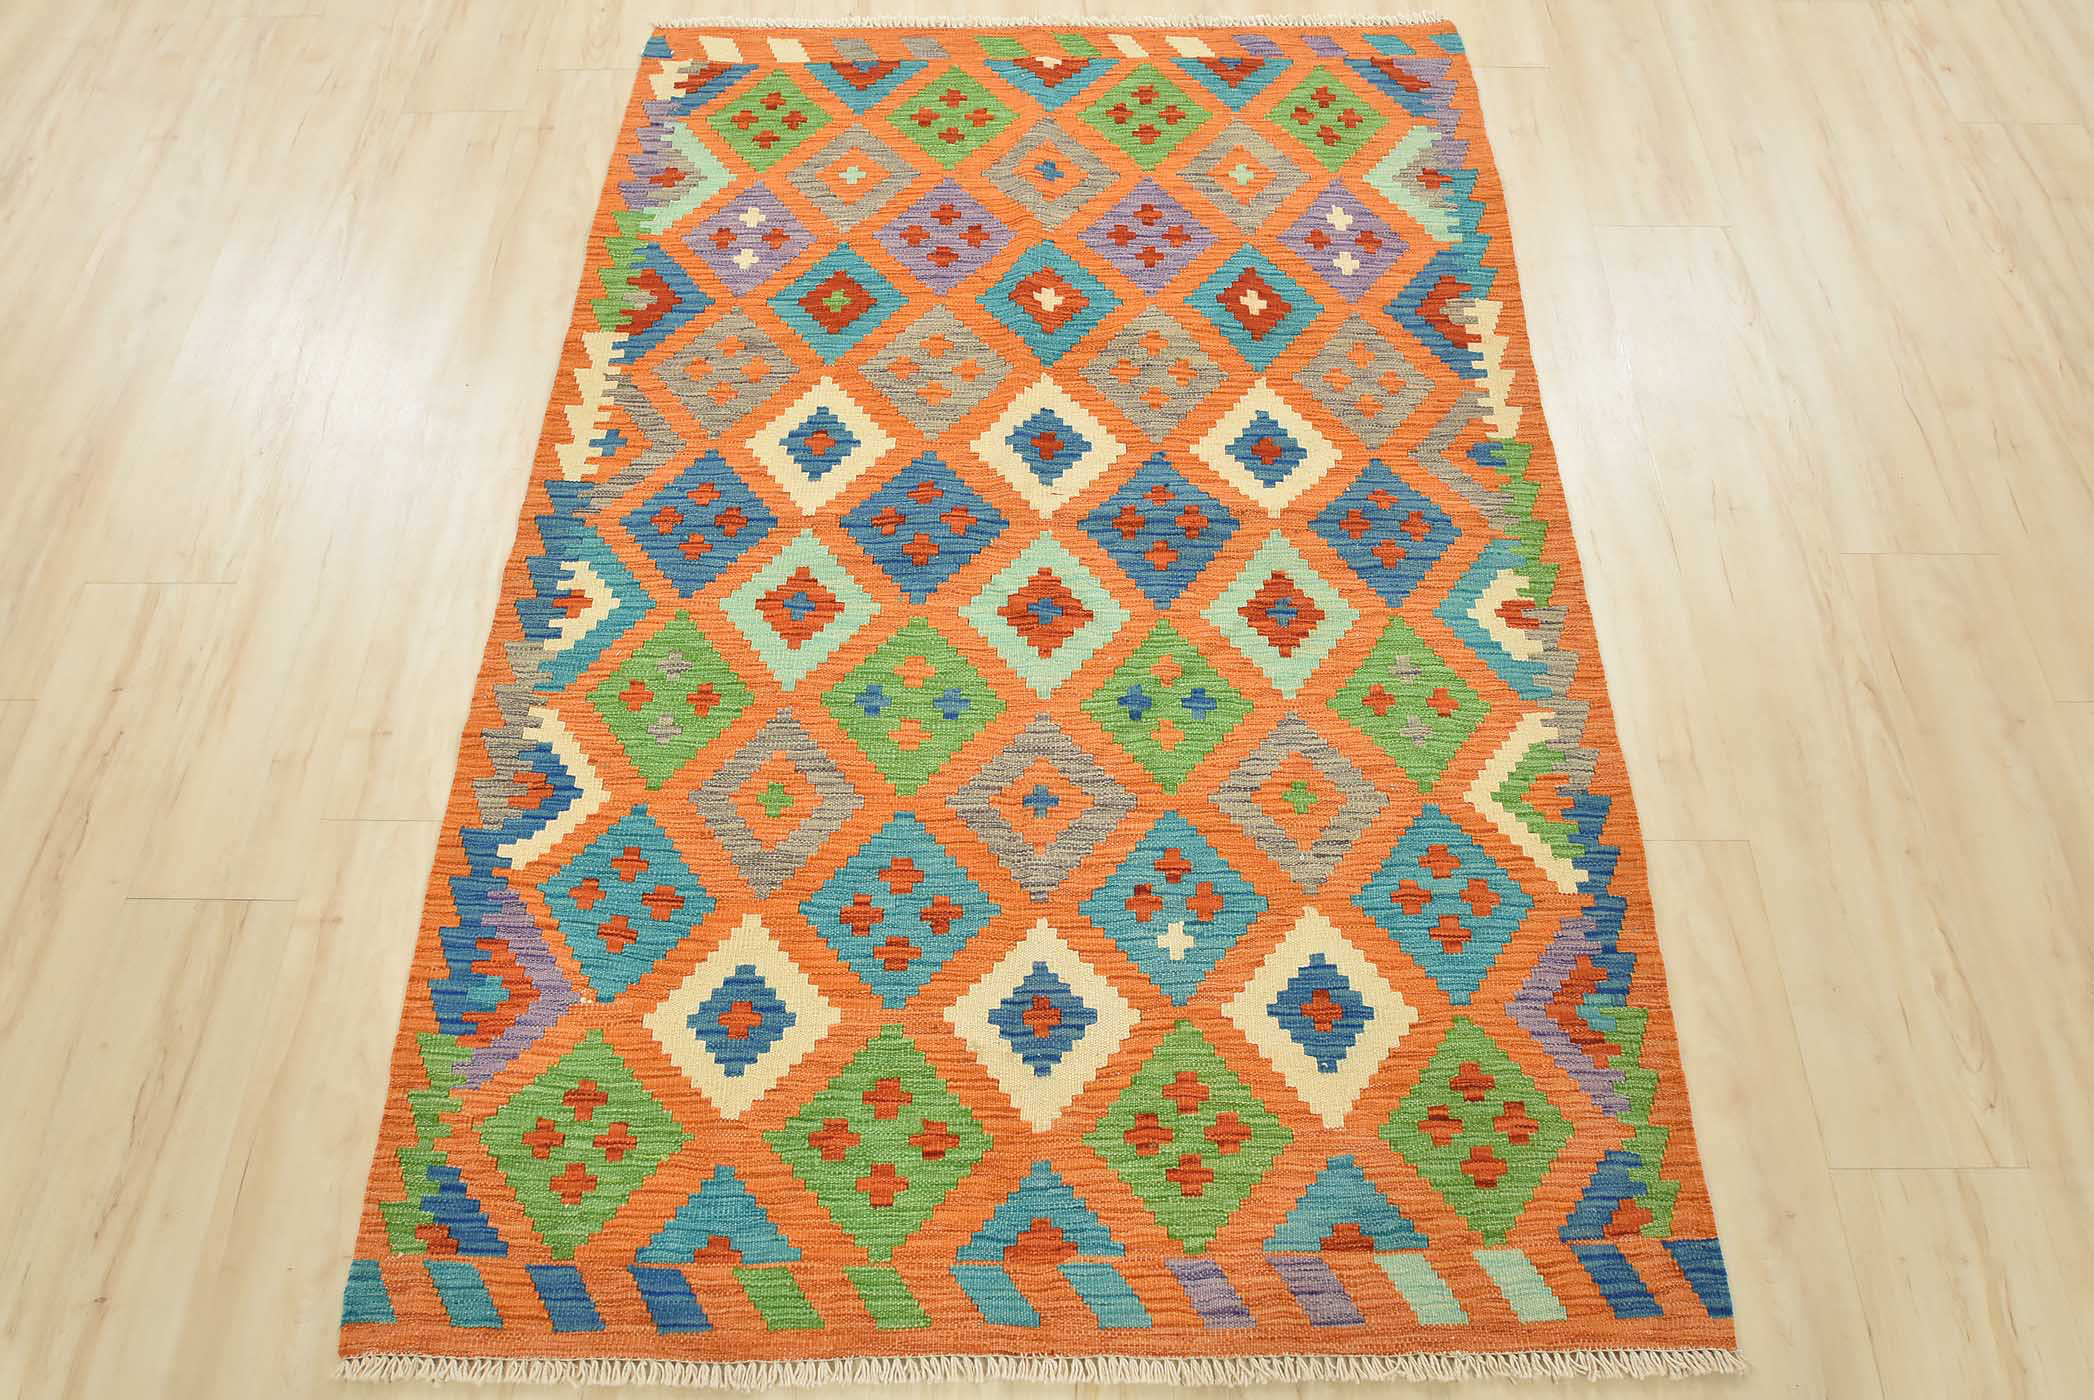 Blue Wool Area Rug with Cotton Warp (4 x 6) - Blue Triangle